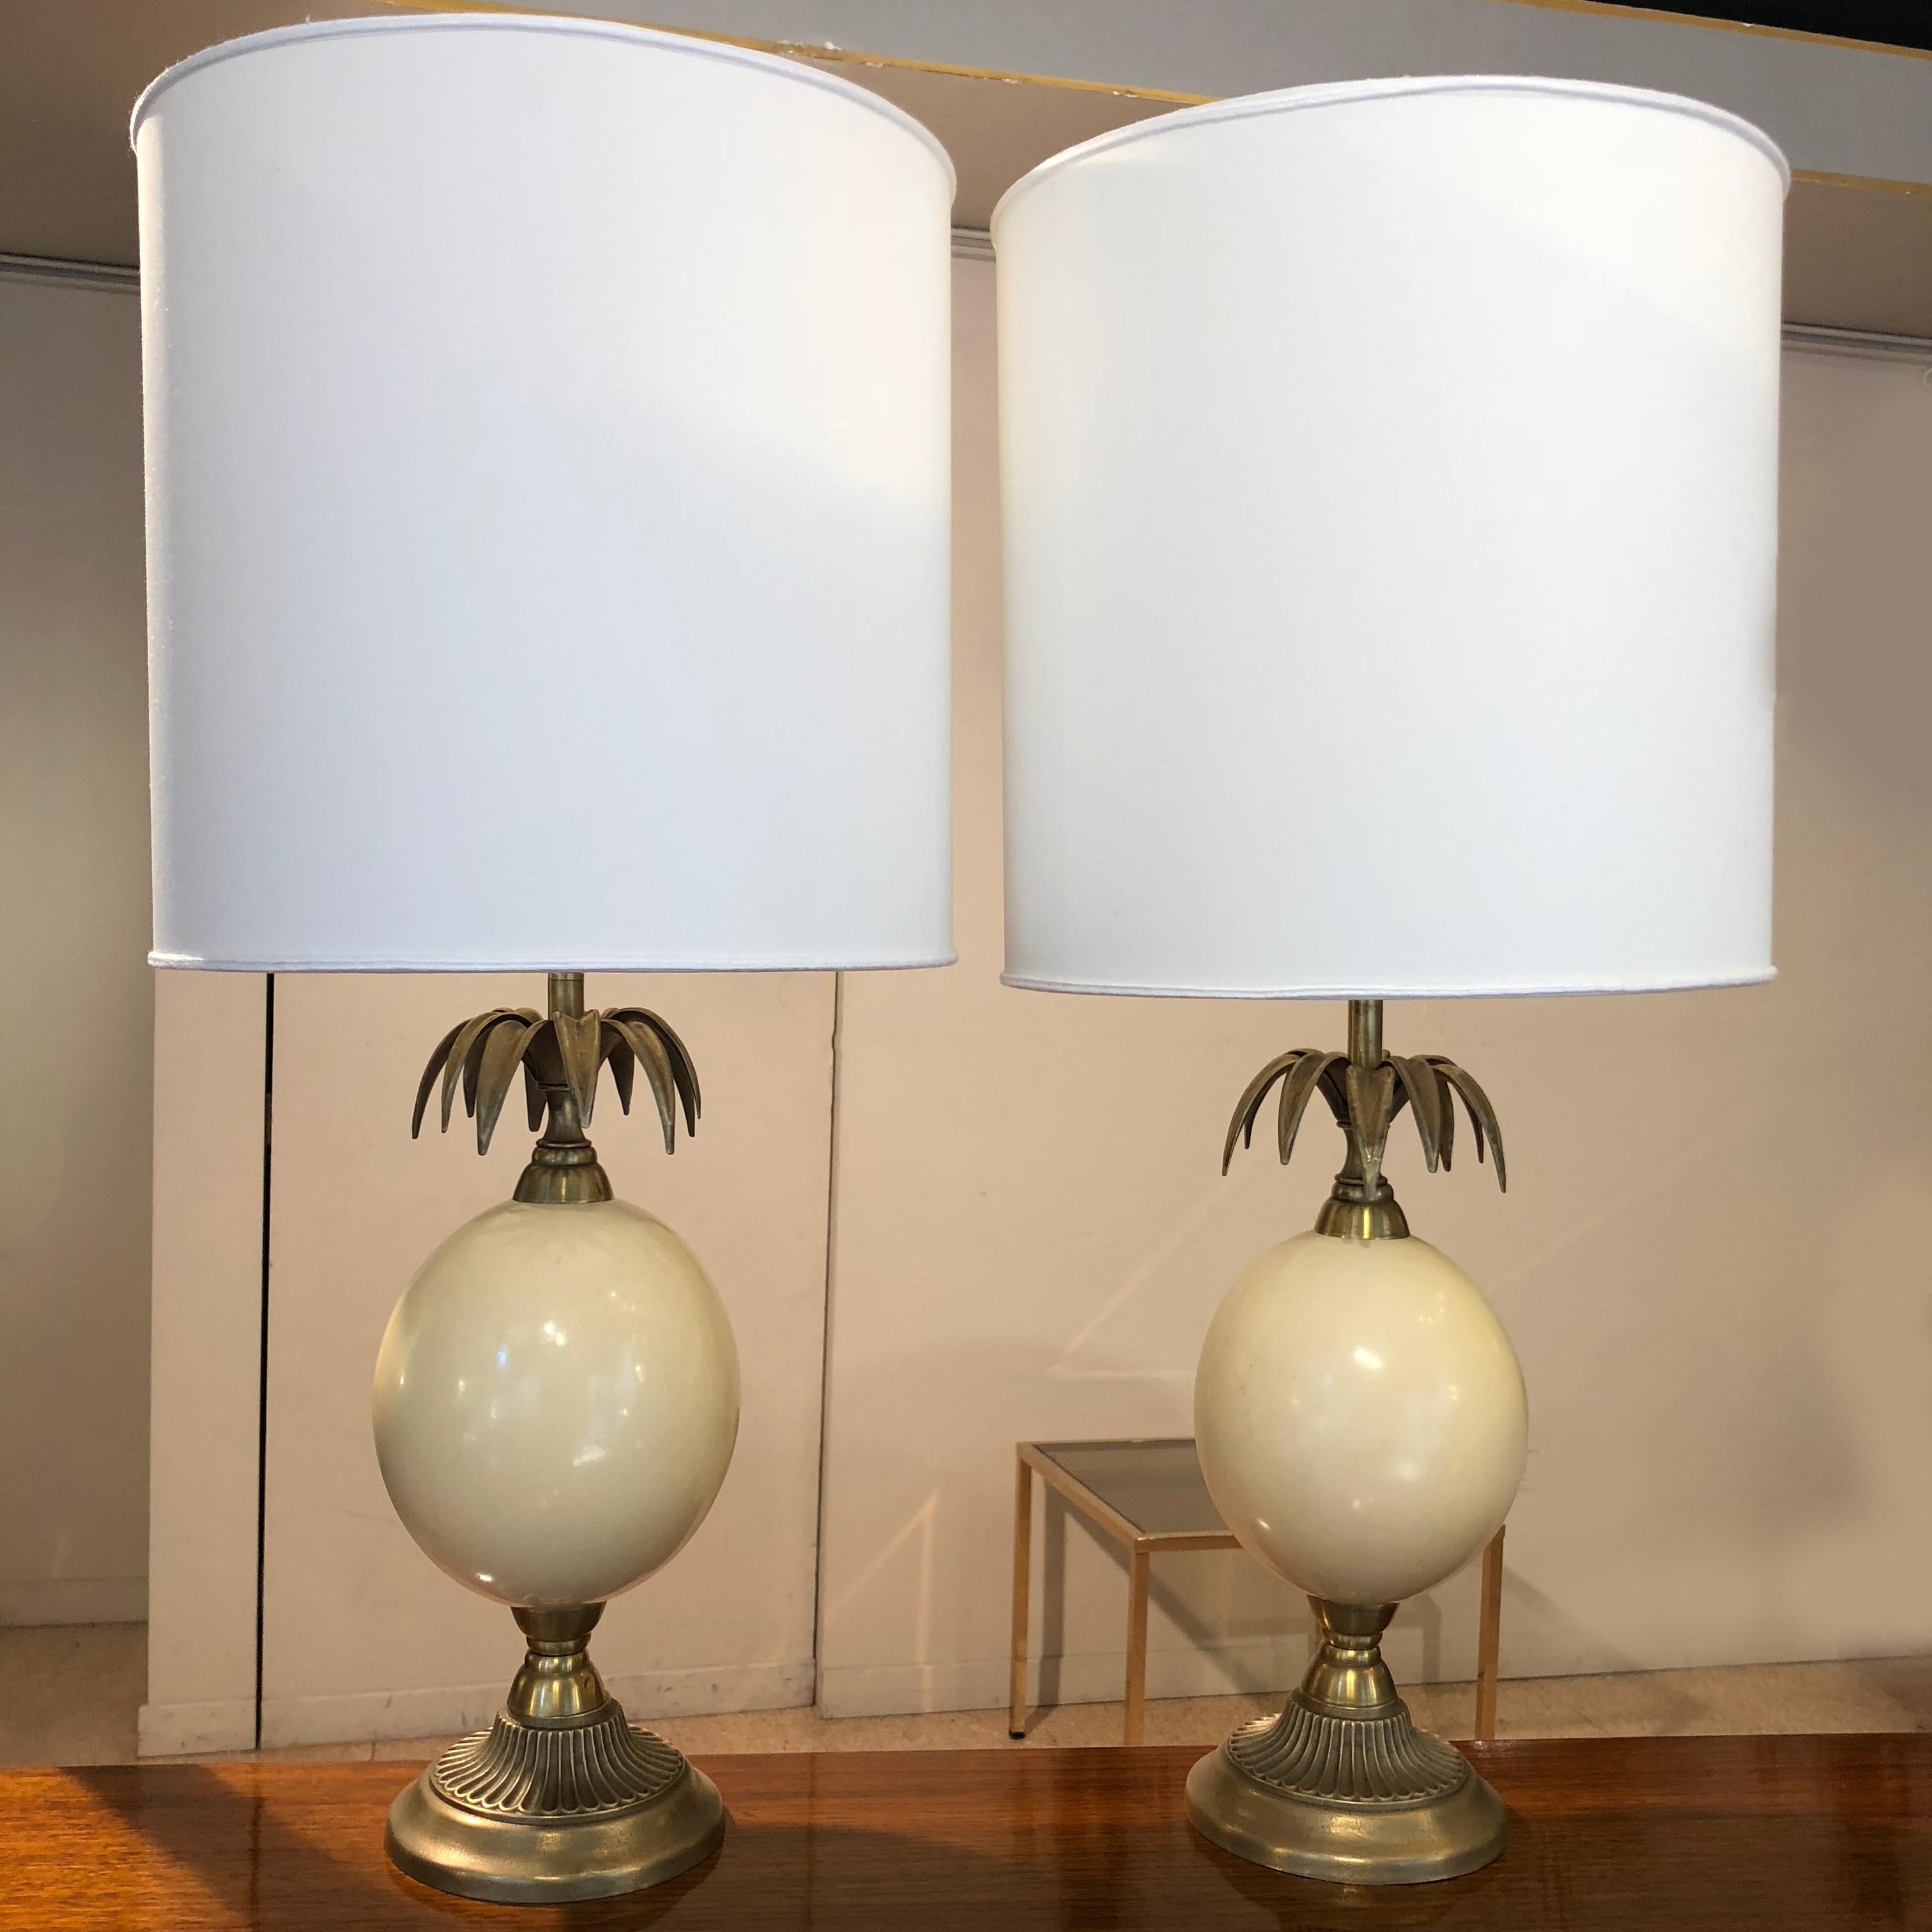 Hollywood Regency Cream and gold Brass Pineapple Shape Table Lamps, 1960s, France